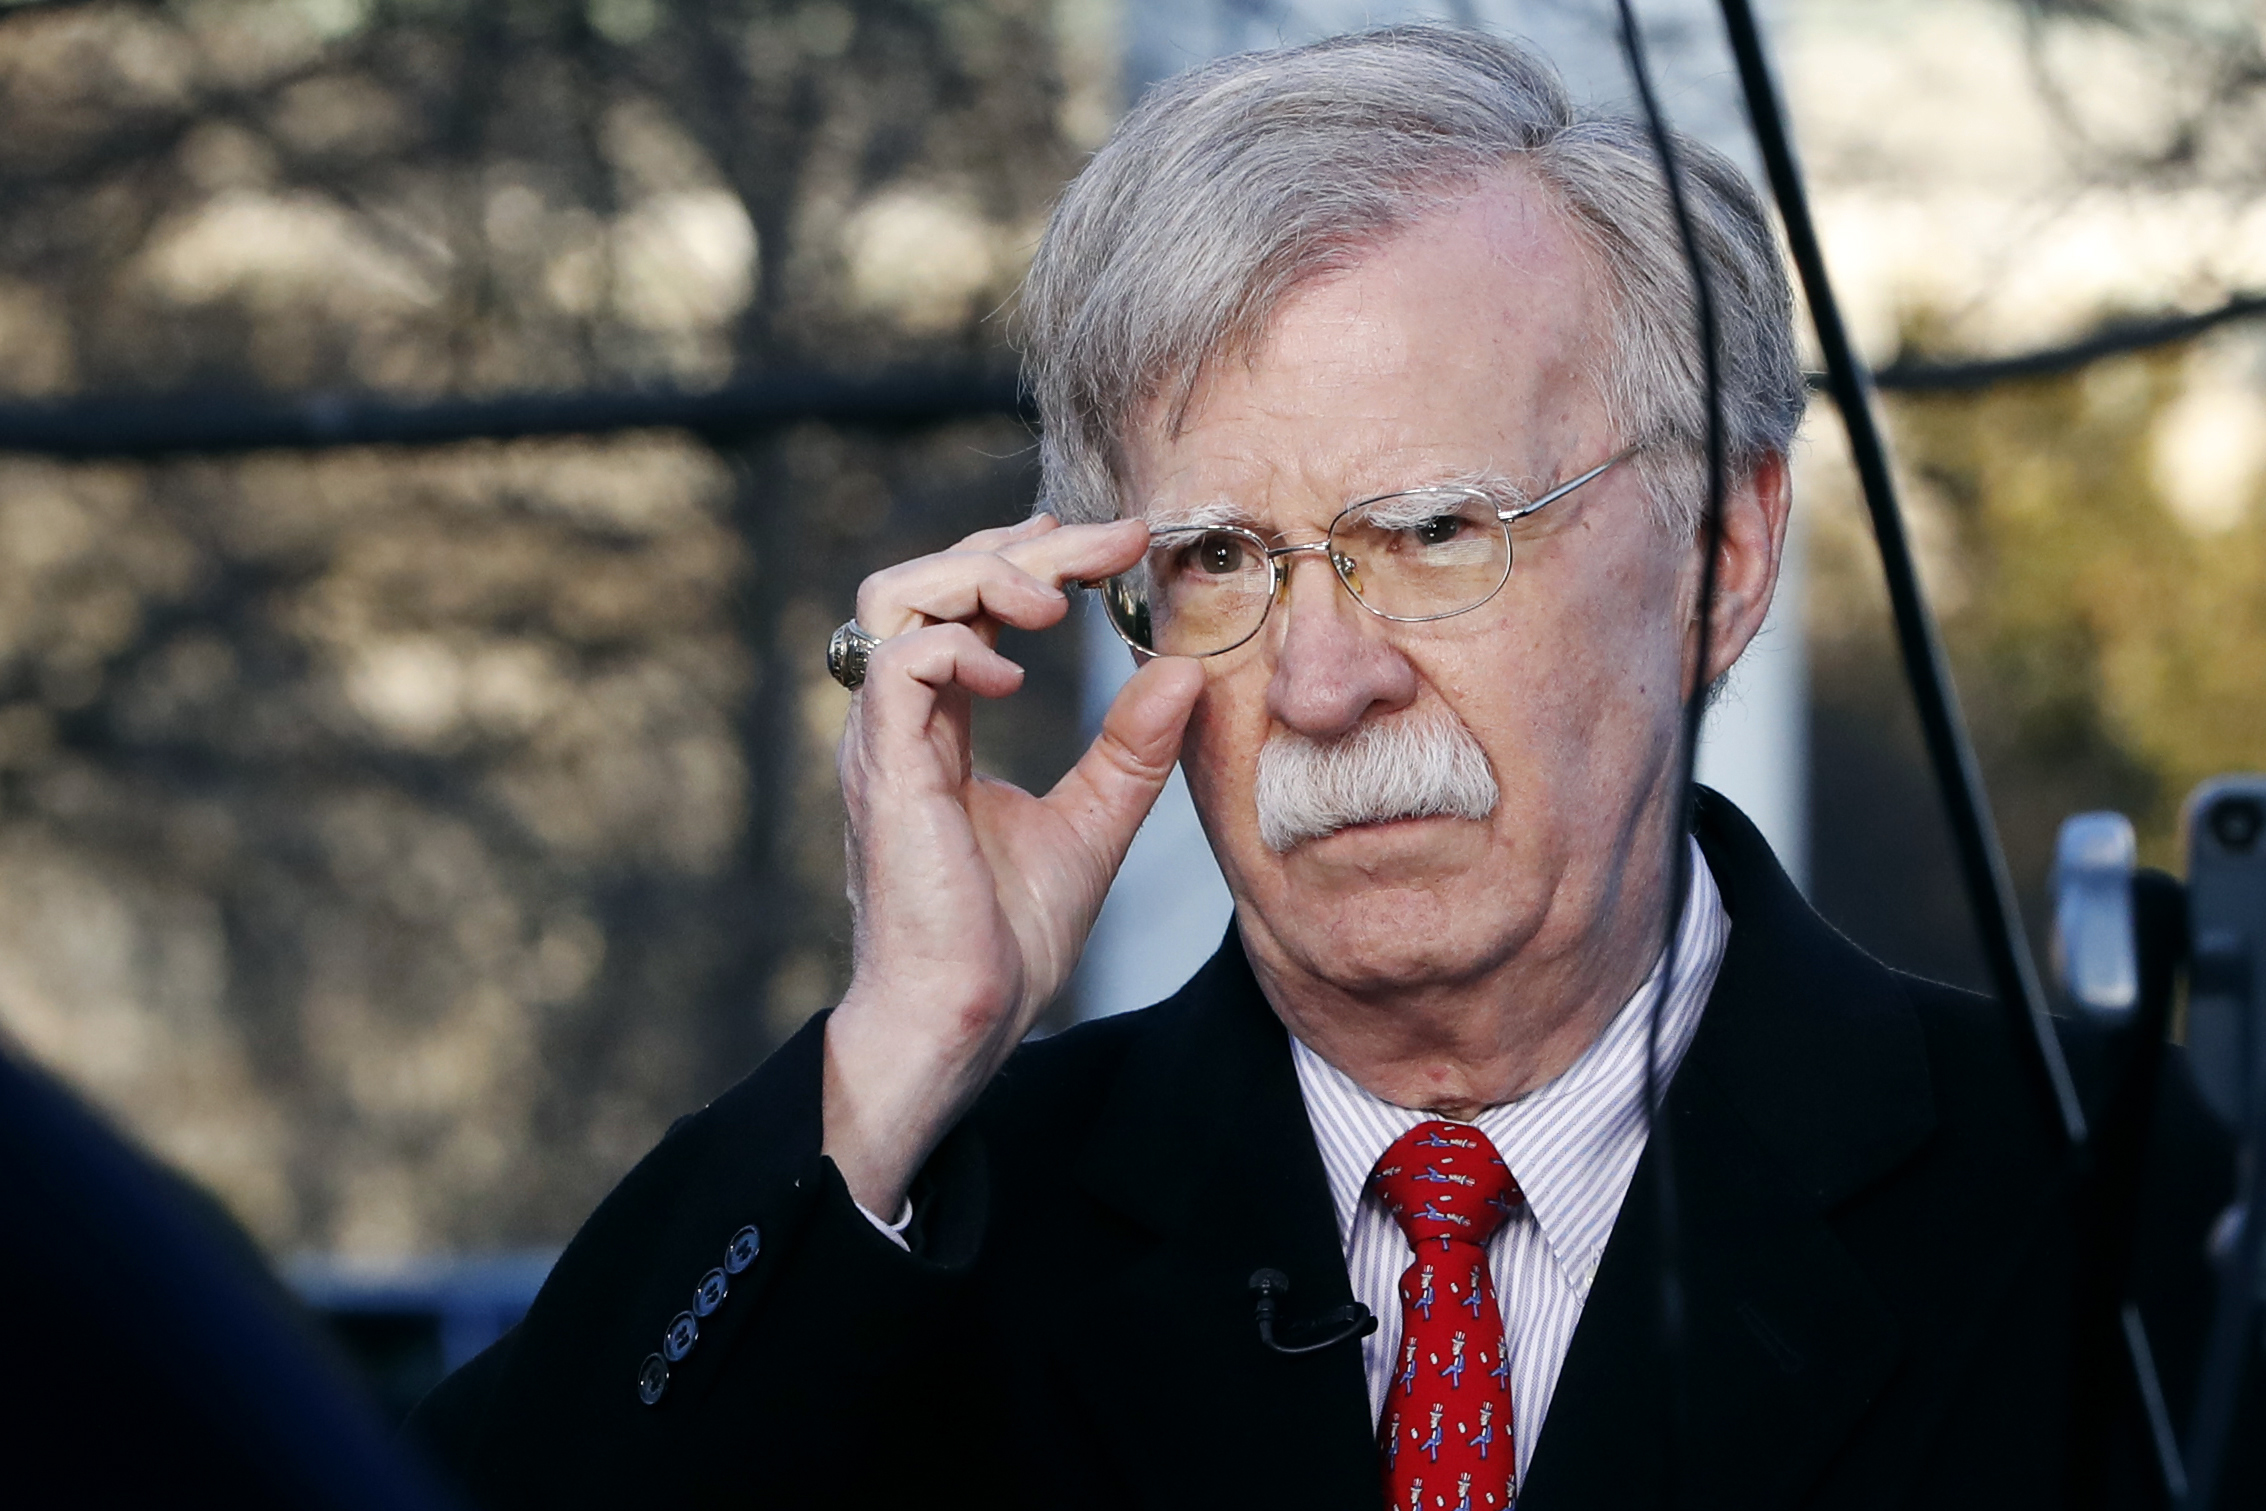 PHOTO: National security adviser John Bolton adjusts his glasses before an interview at the White House in Washington, March 5, 2019.